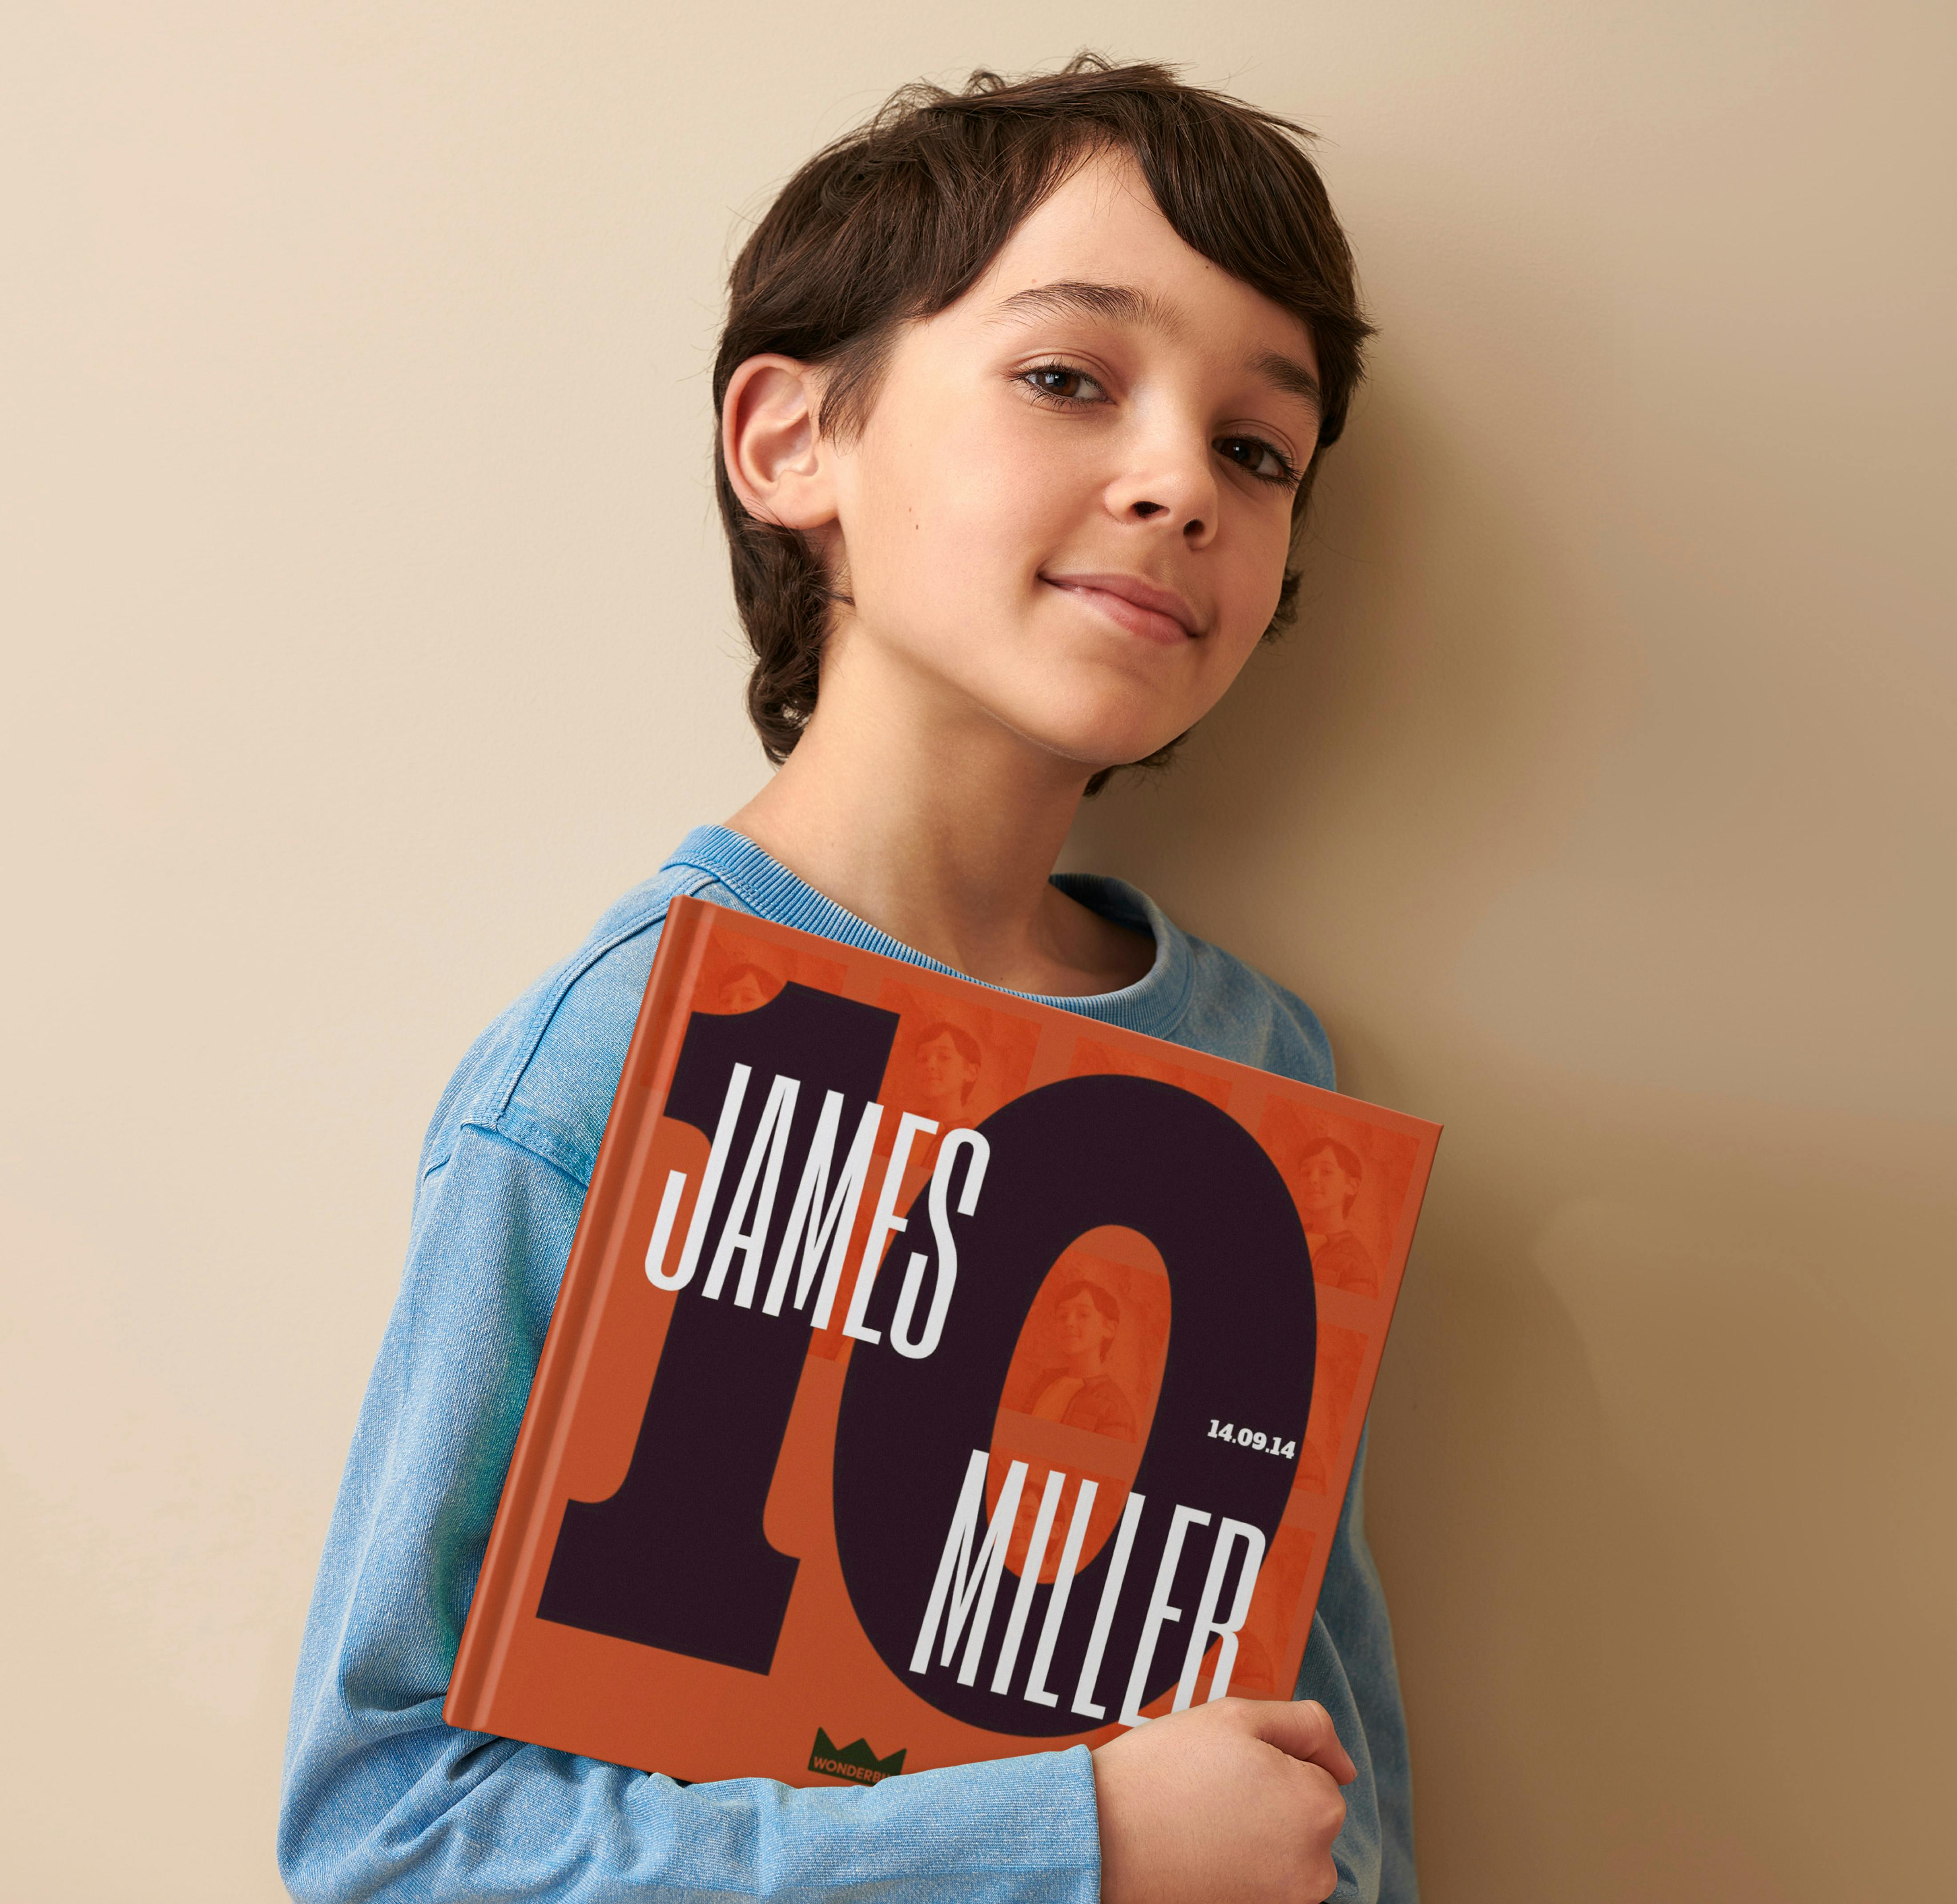 Child holding their personalised book